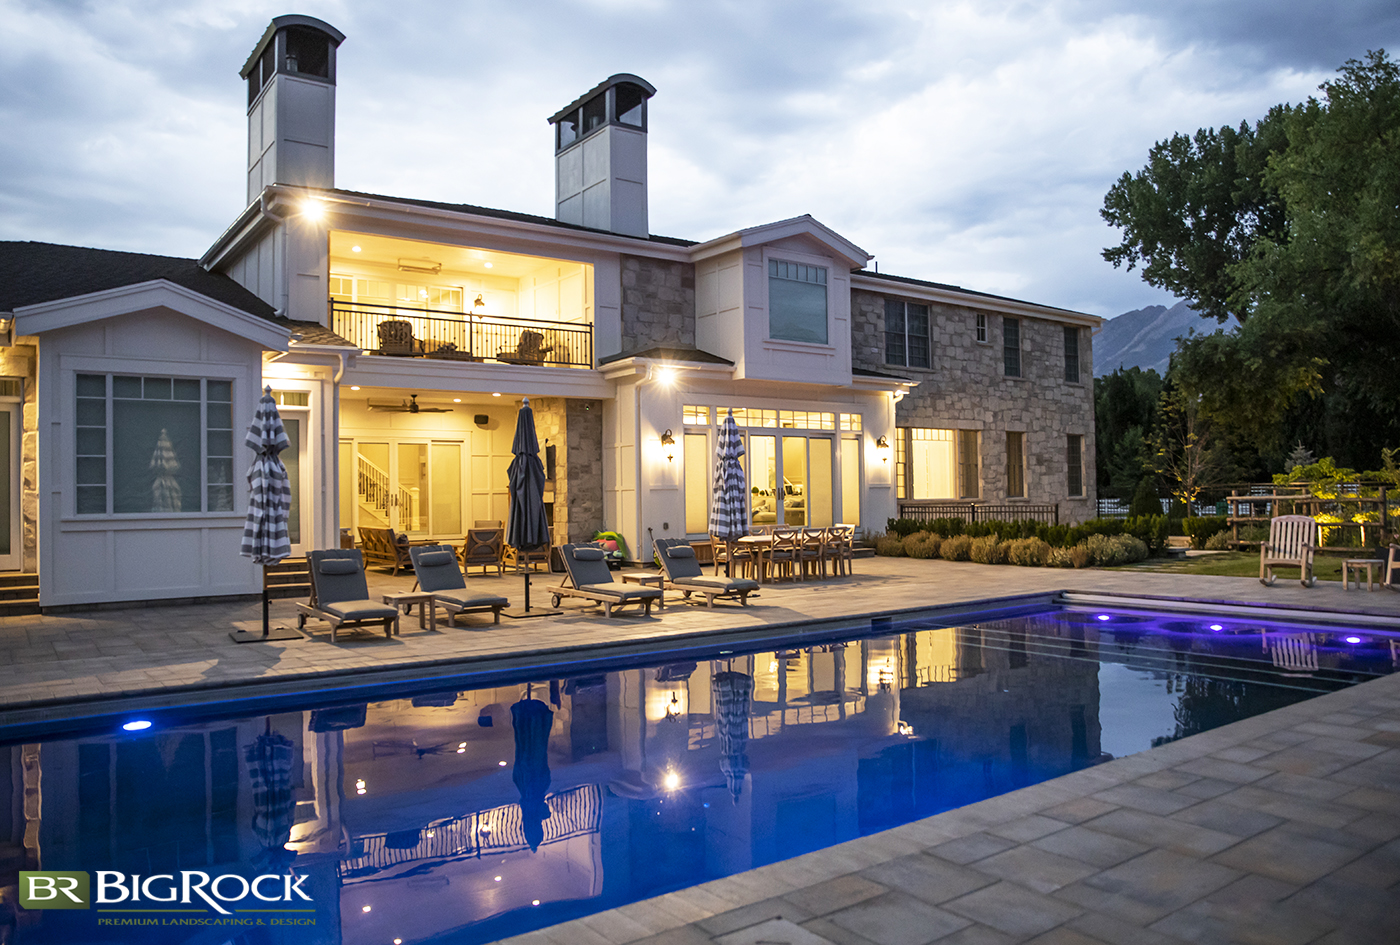 Big Rock Premium Landscaping and Design is the best pool contractor to complete your beautiful pool installation and design.